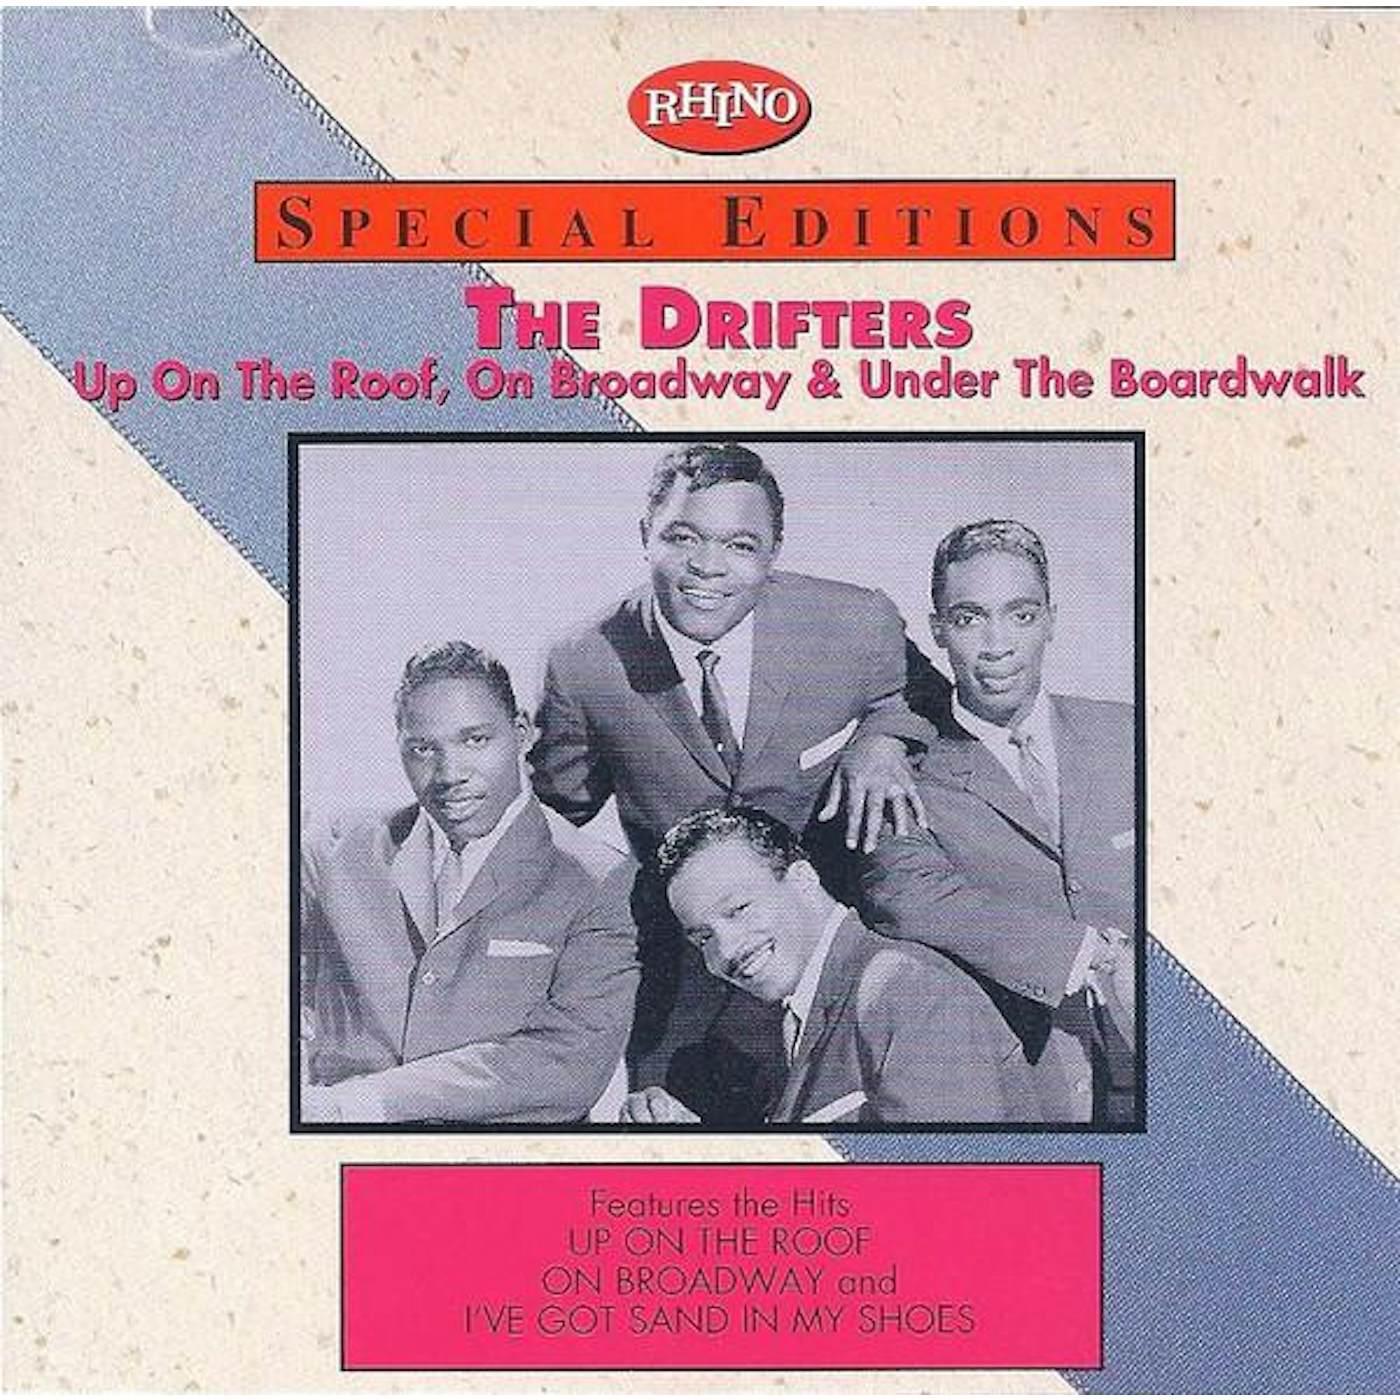 The Drifters HITS (UP ON THE ROOF, ON BROADWAY, UNDER THE BOARDWALK) CD